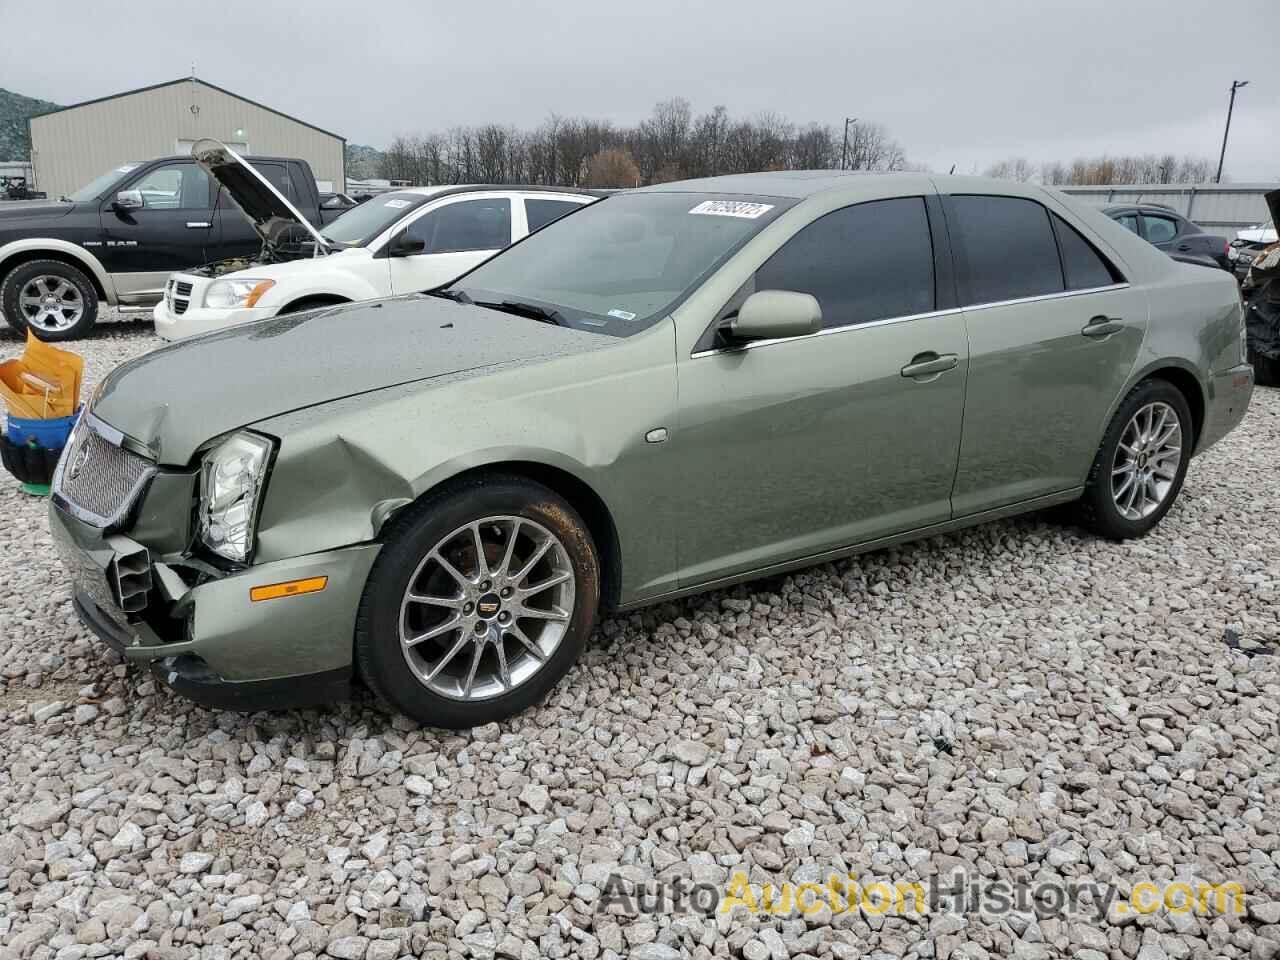 2005 CADILLAC STS, 1G6DC67A950163864